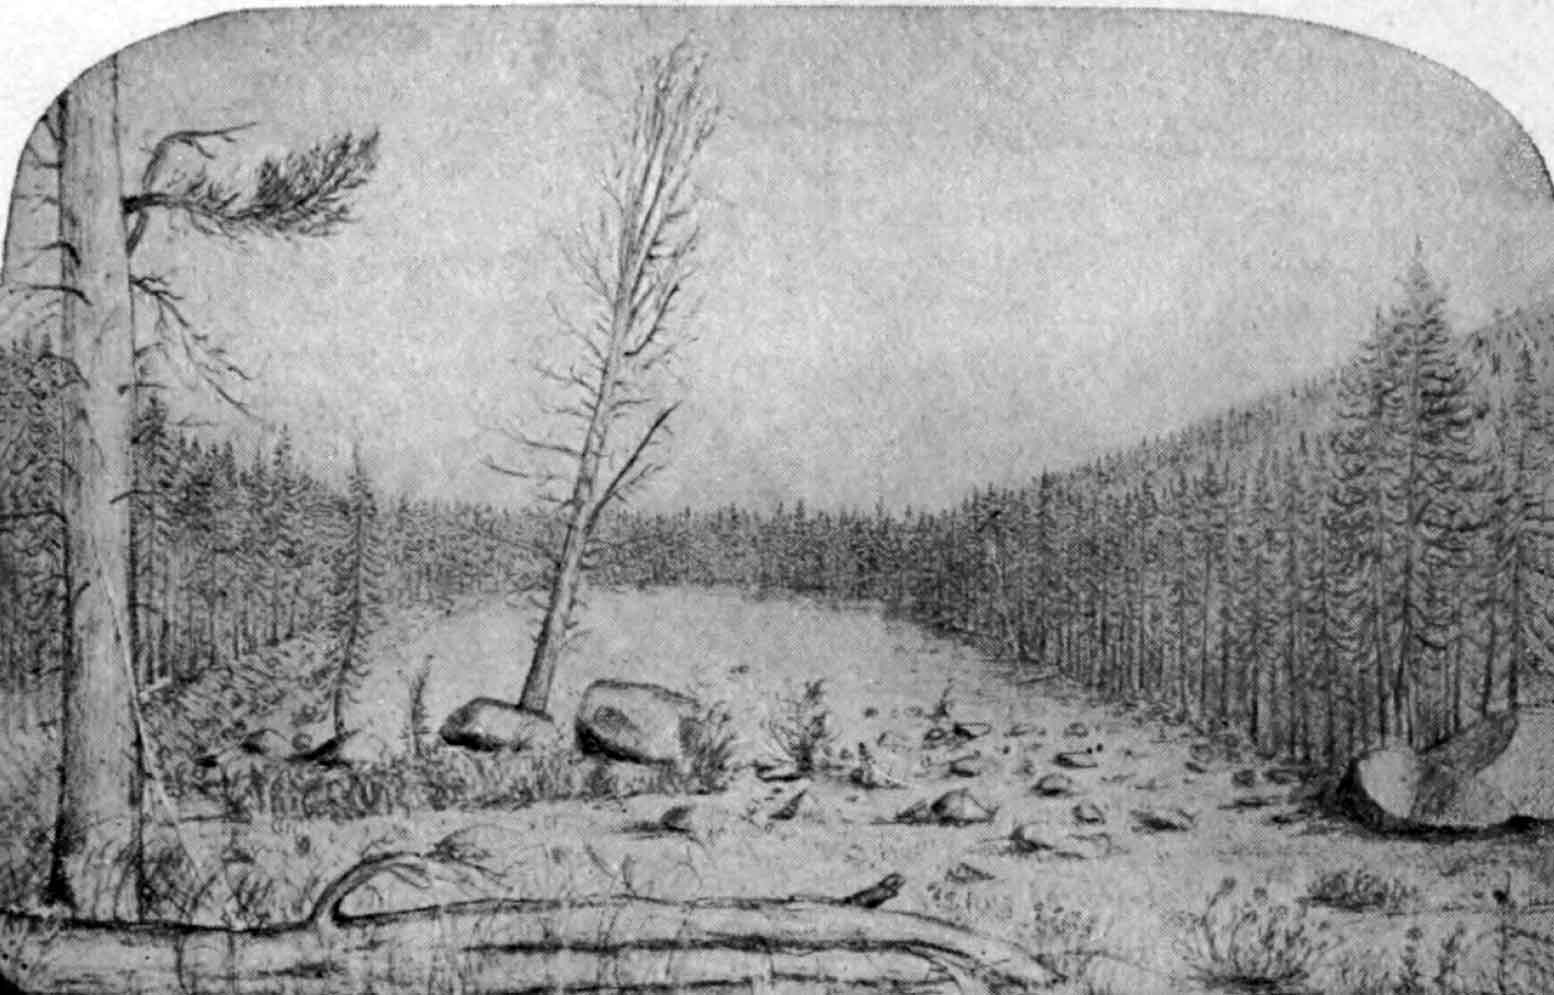 A sketch of an alpine meadow strewn with moraine boulders and surrounded by a thick forest of evergreens.